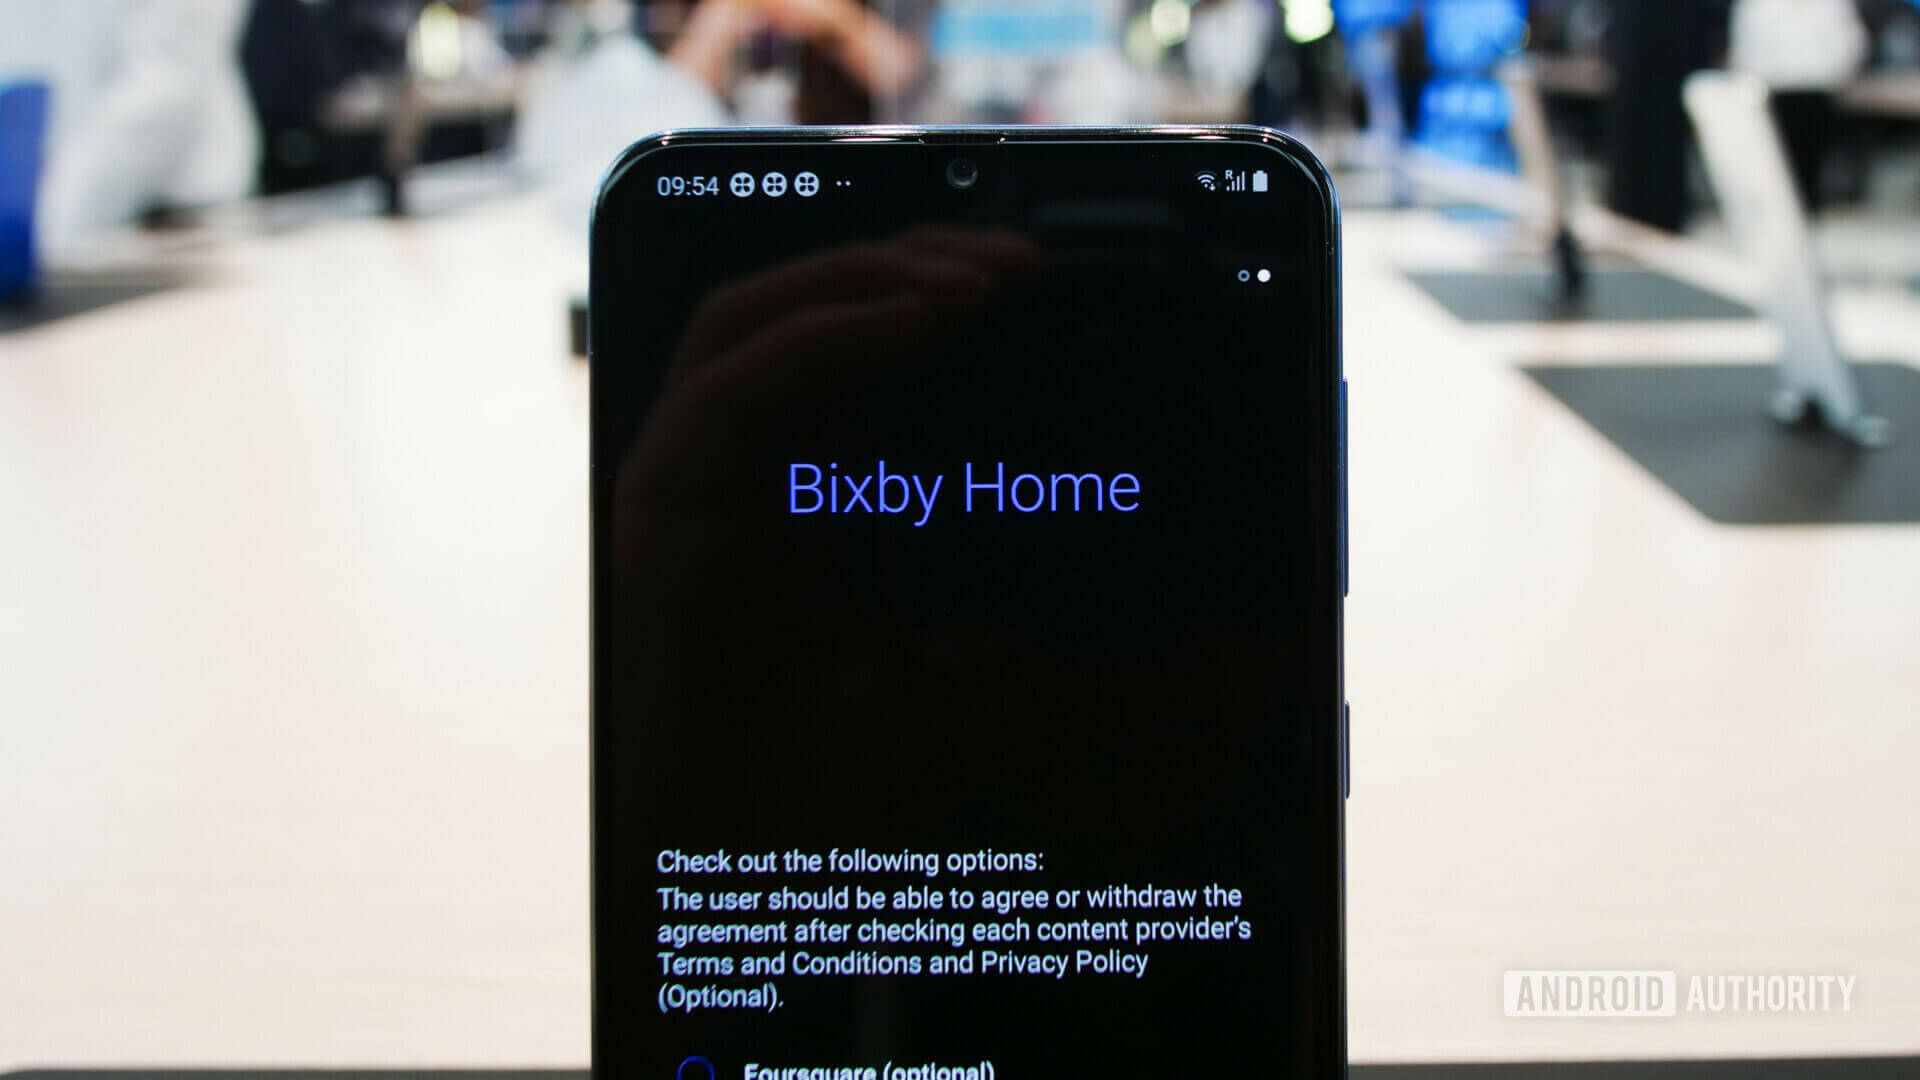 How To Uninstall Bixby on your Samsung Phone